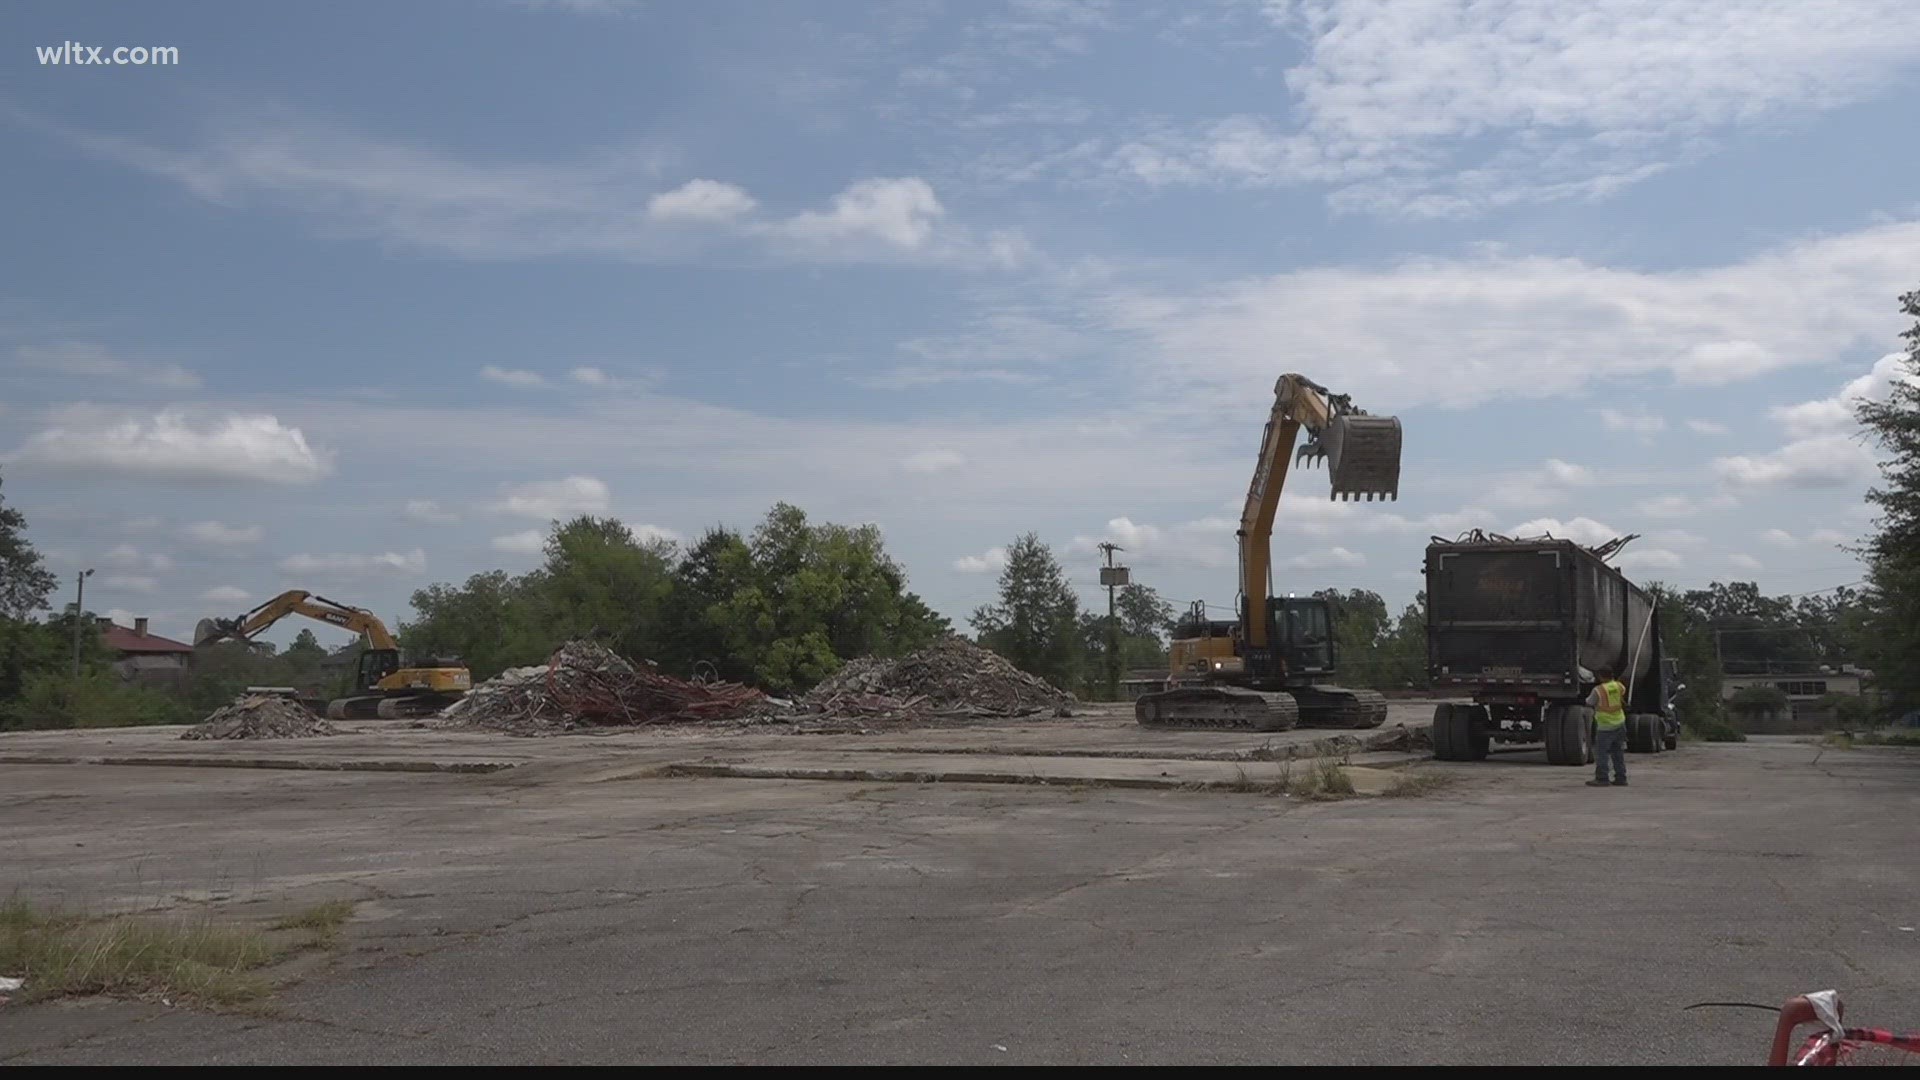 Demolition has begun at 1480 Russell Street, soon to be home to the new Orangeburg Court house.